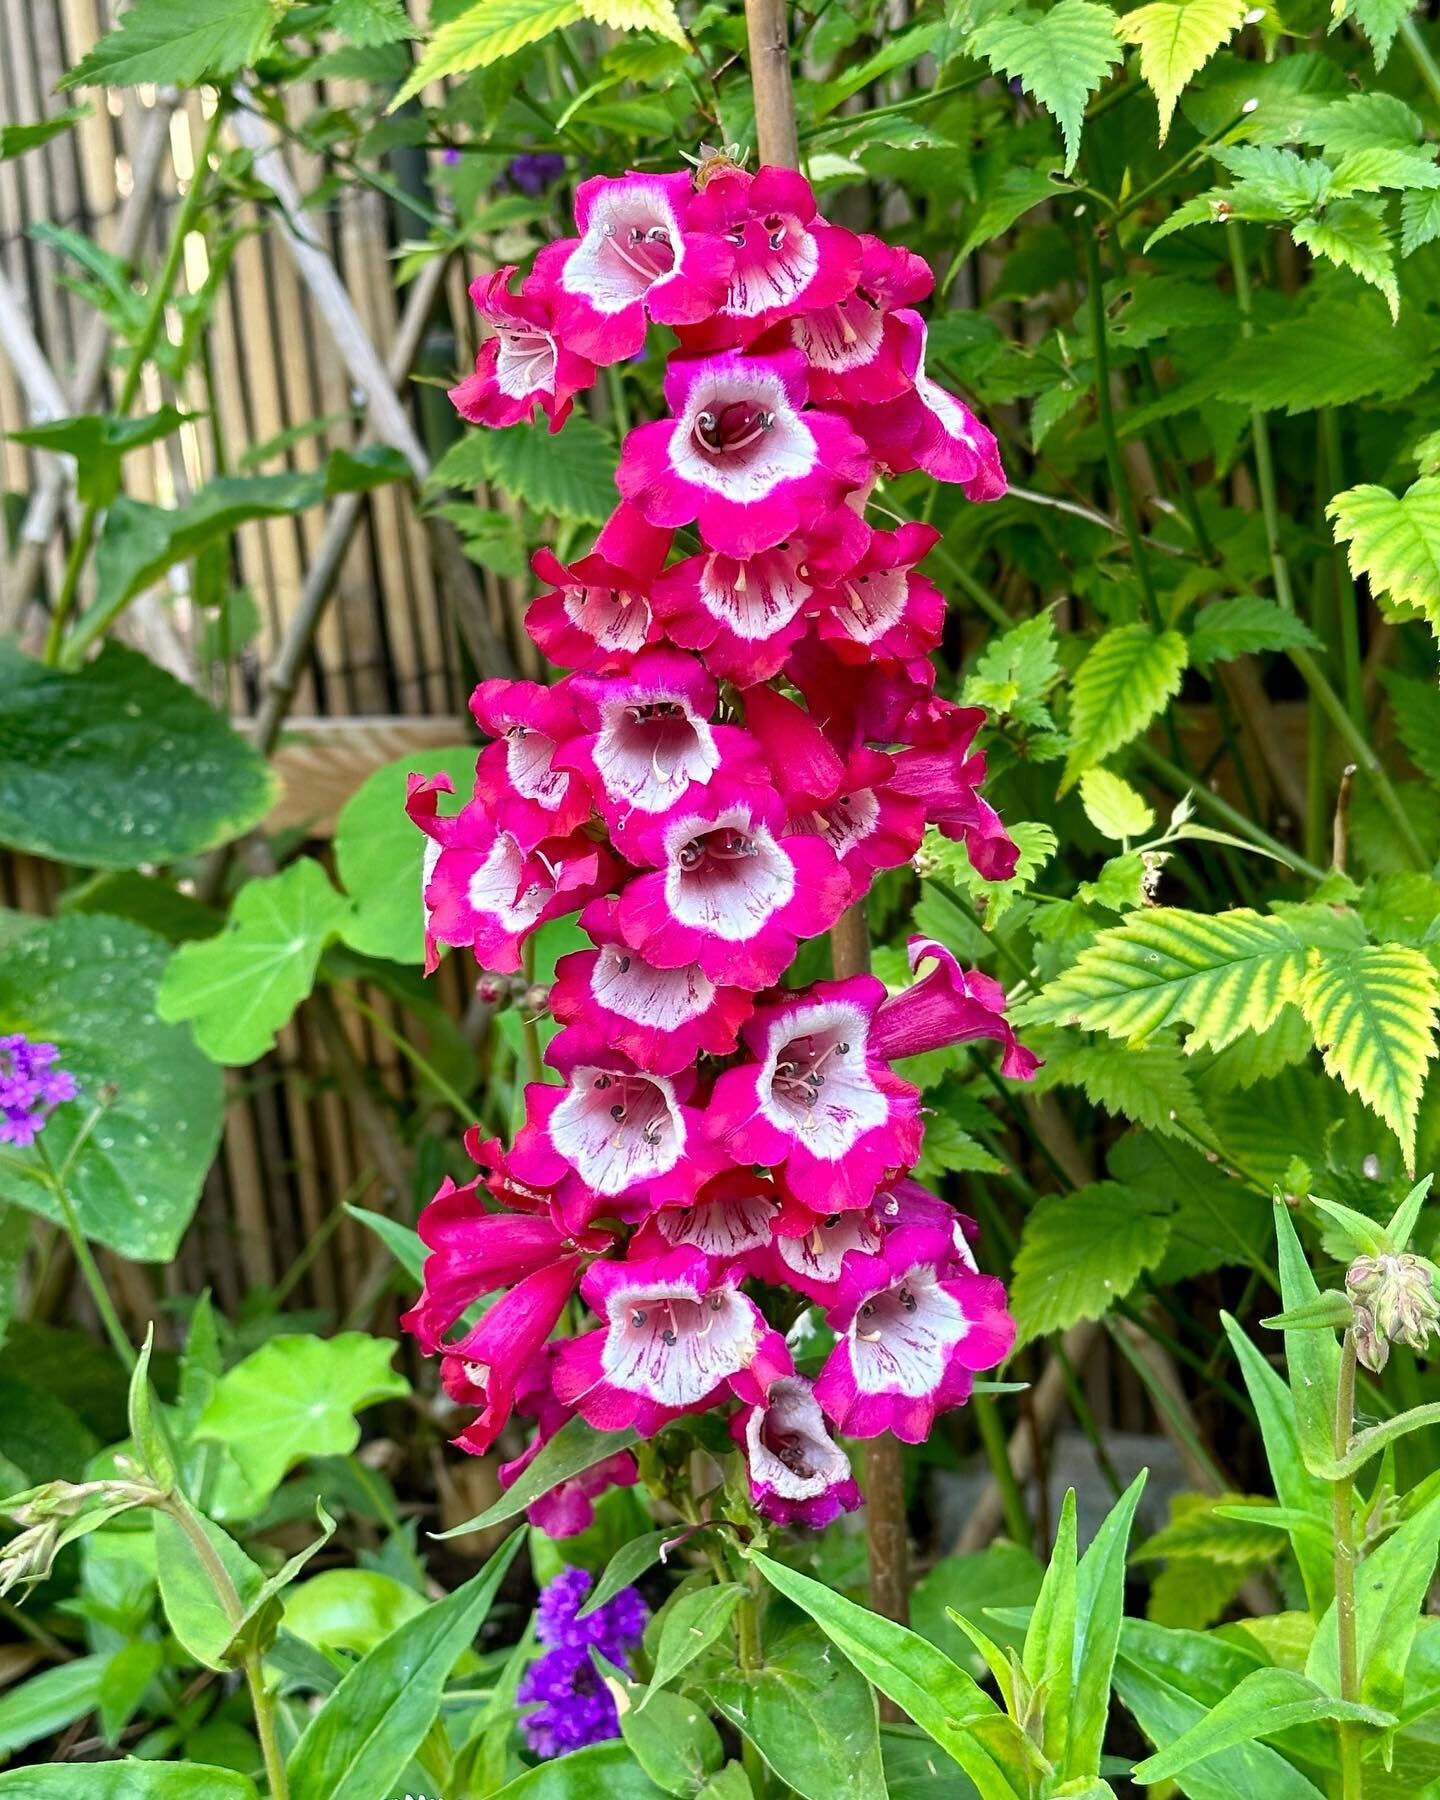 Penstemon. A favorite in the garden this year. It is a really resilient drought-tolerant perennial with flowers that attract all kinds of pollinators. Big hairy bumble bees seem to love it! Bought this one from @stevens.of.sibsey my absolute favorite